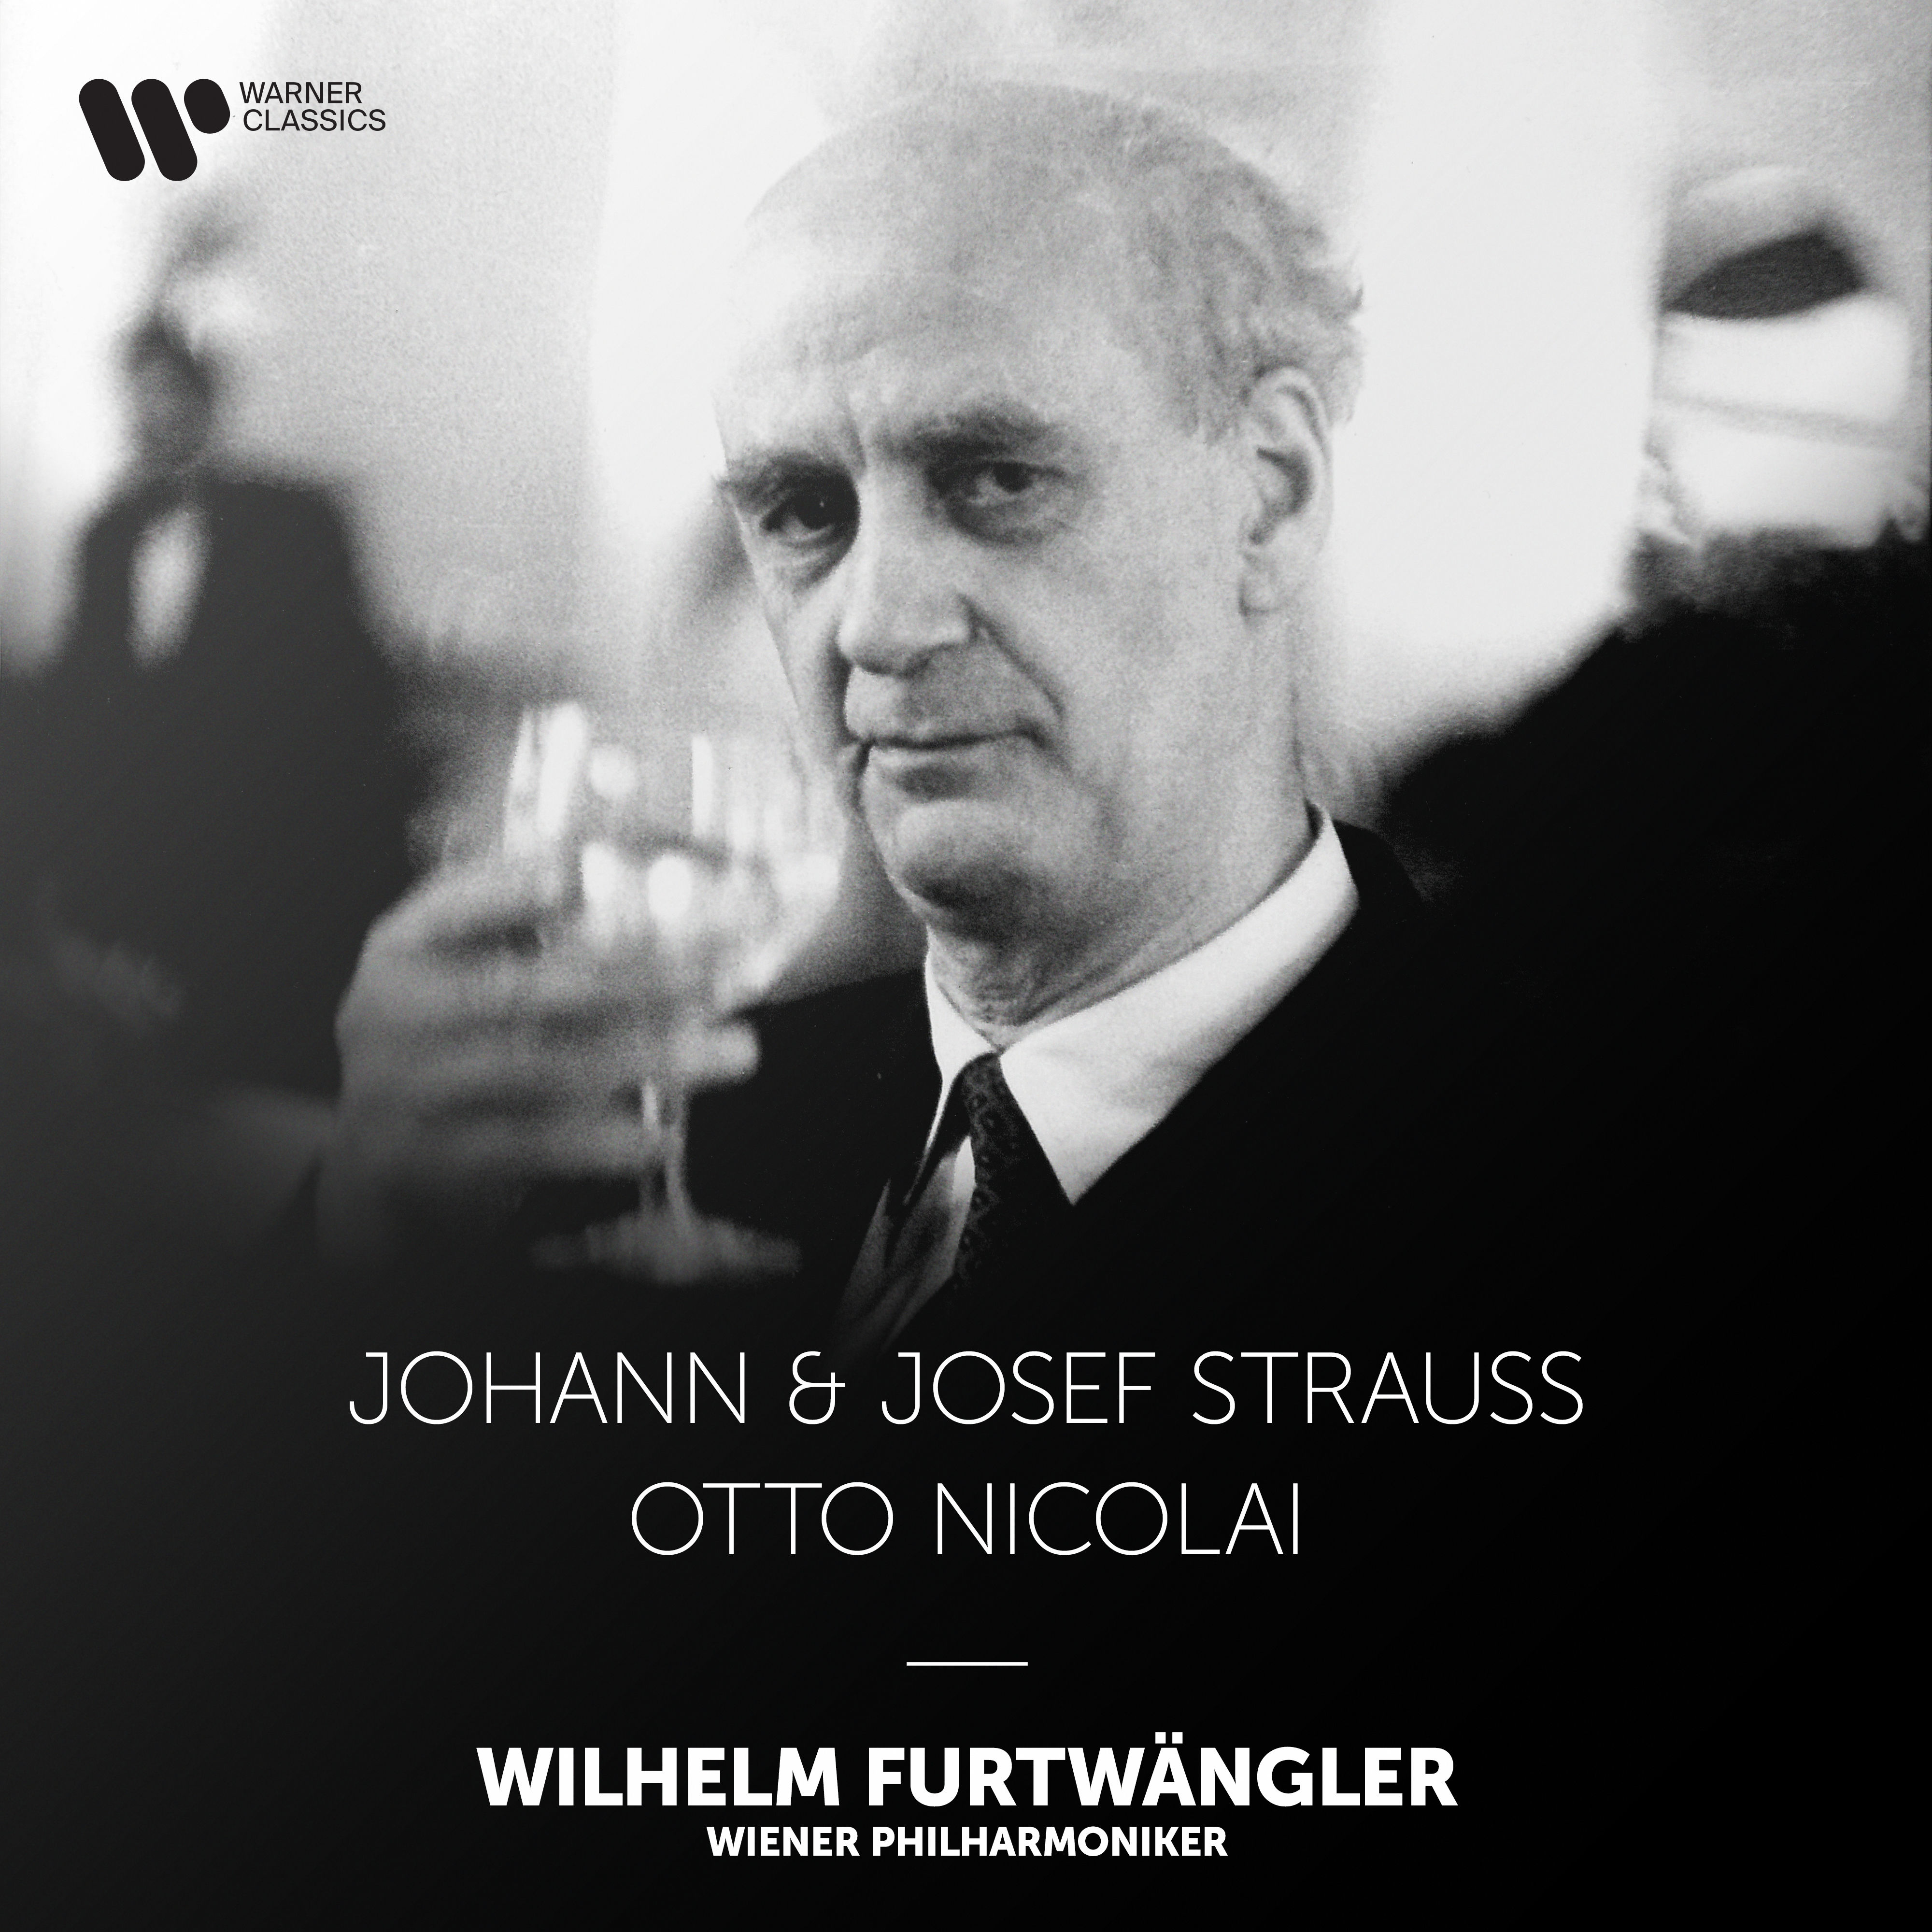 Strauss- Emperor Waltz & Pizzicato-Polka – Nicolai- The Merry Wives of Windsor